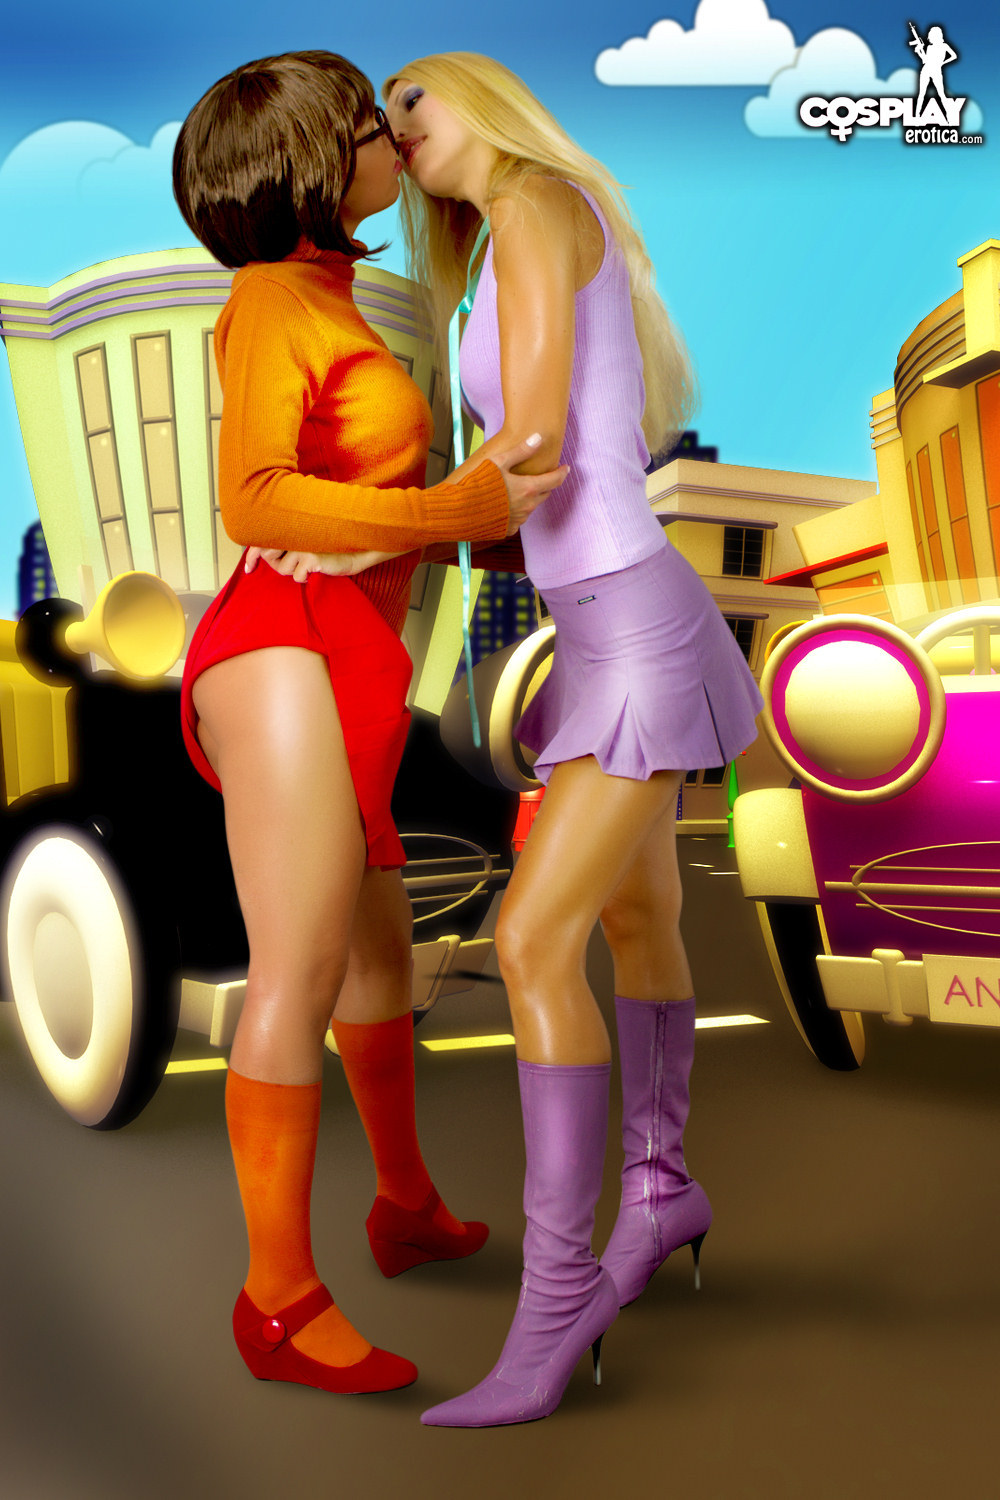 Mea Lee and Angela - Meeting in Toon Town shows free gallery picture 11-11